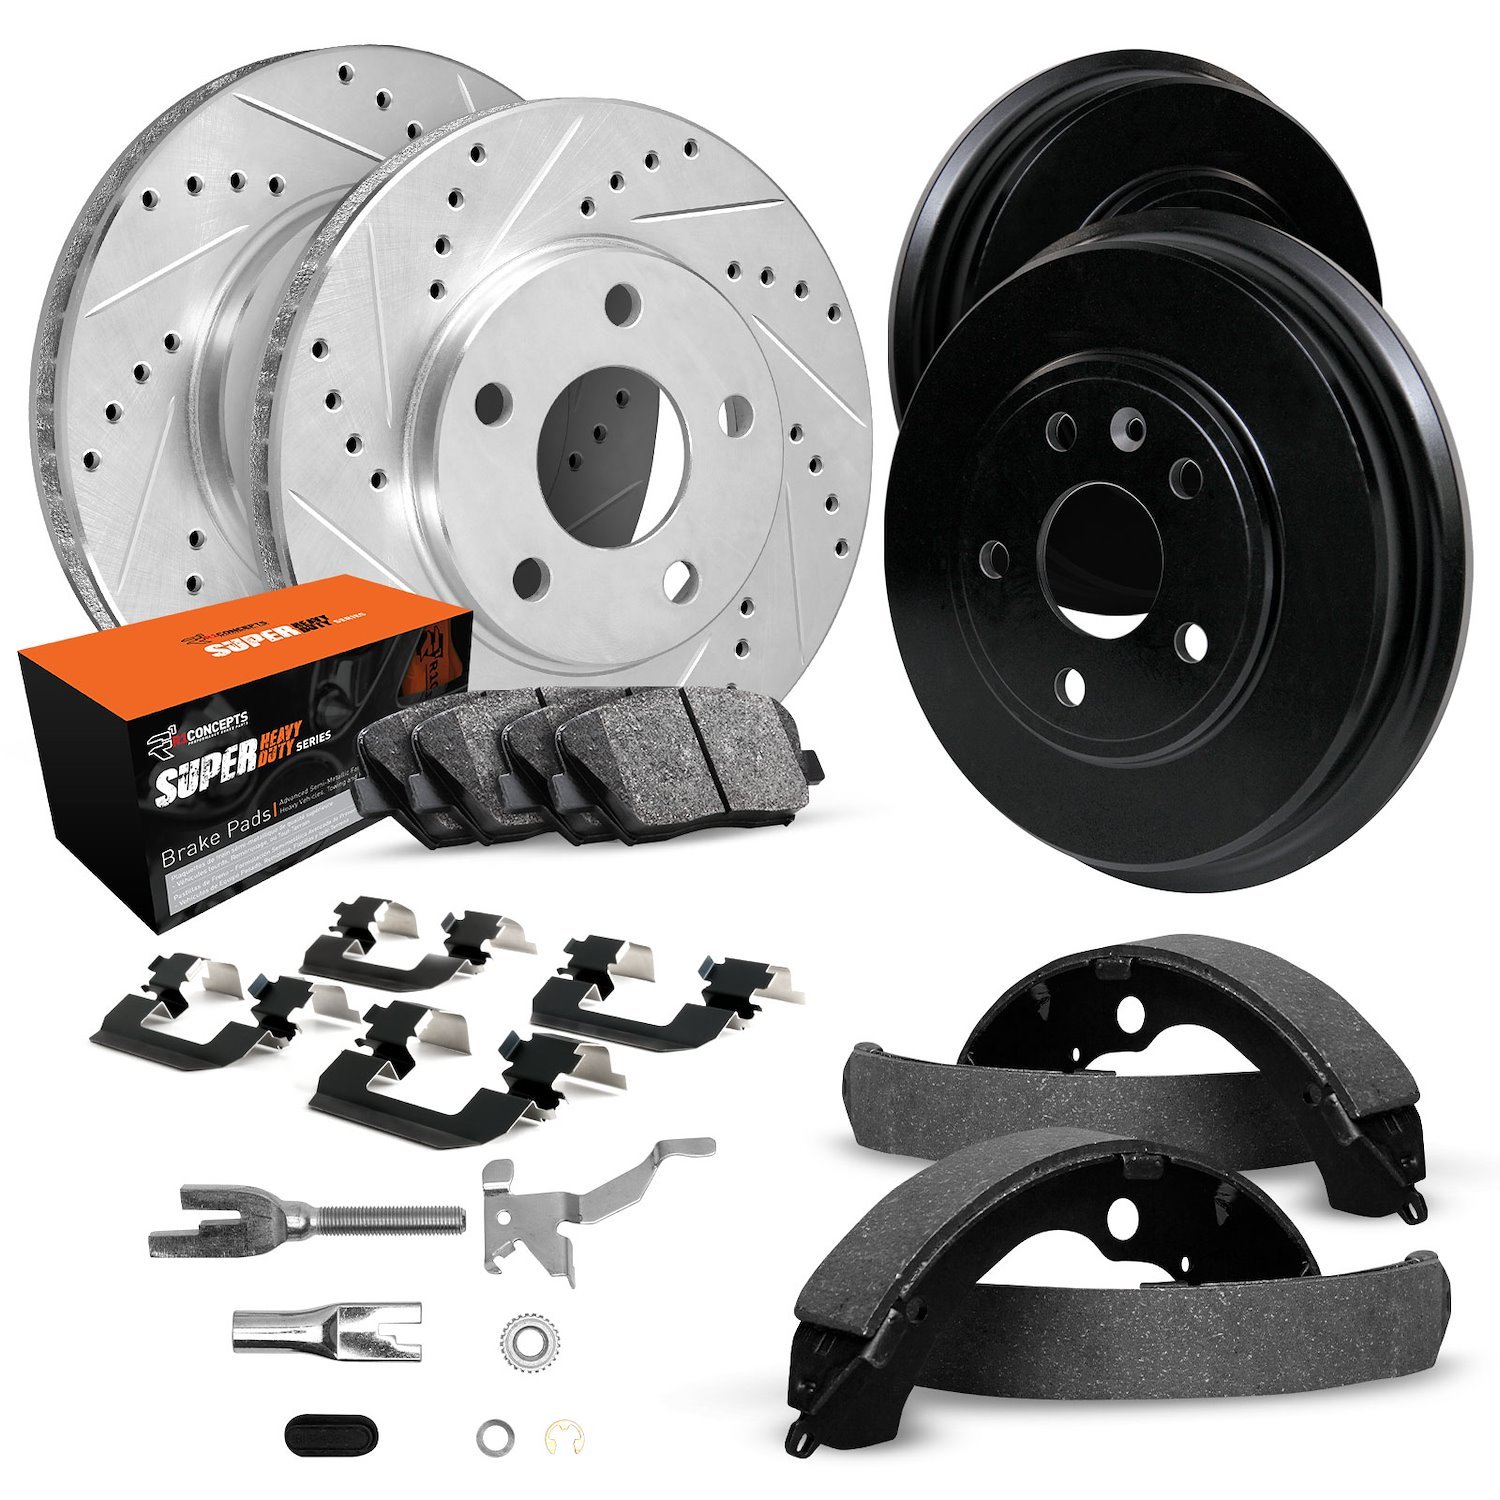 E-Line Drilled/Slotted Silver Rotor & Drum Set w/Super-Duty Pads, Shoes/Hardware/Adjusters, 1977-1985 Ford/Lincoln/Mercury/Mazda